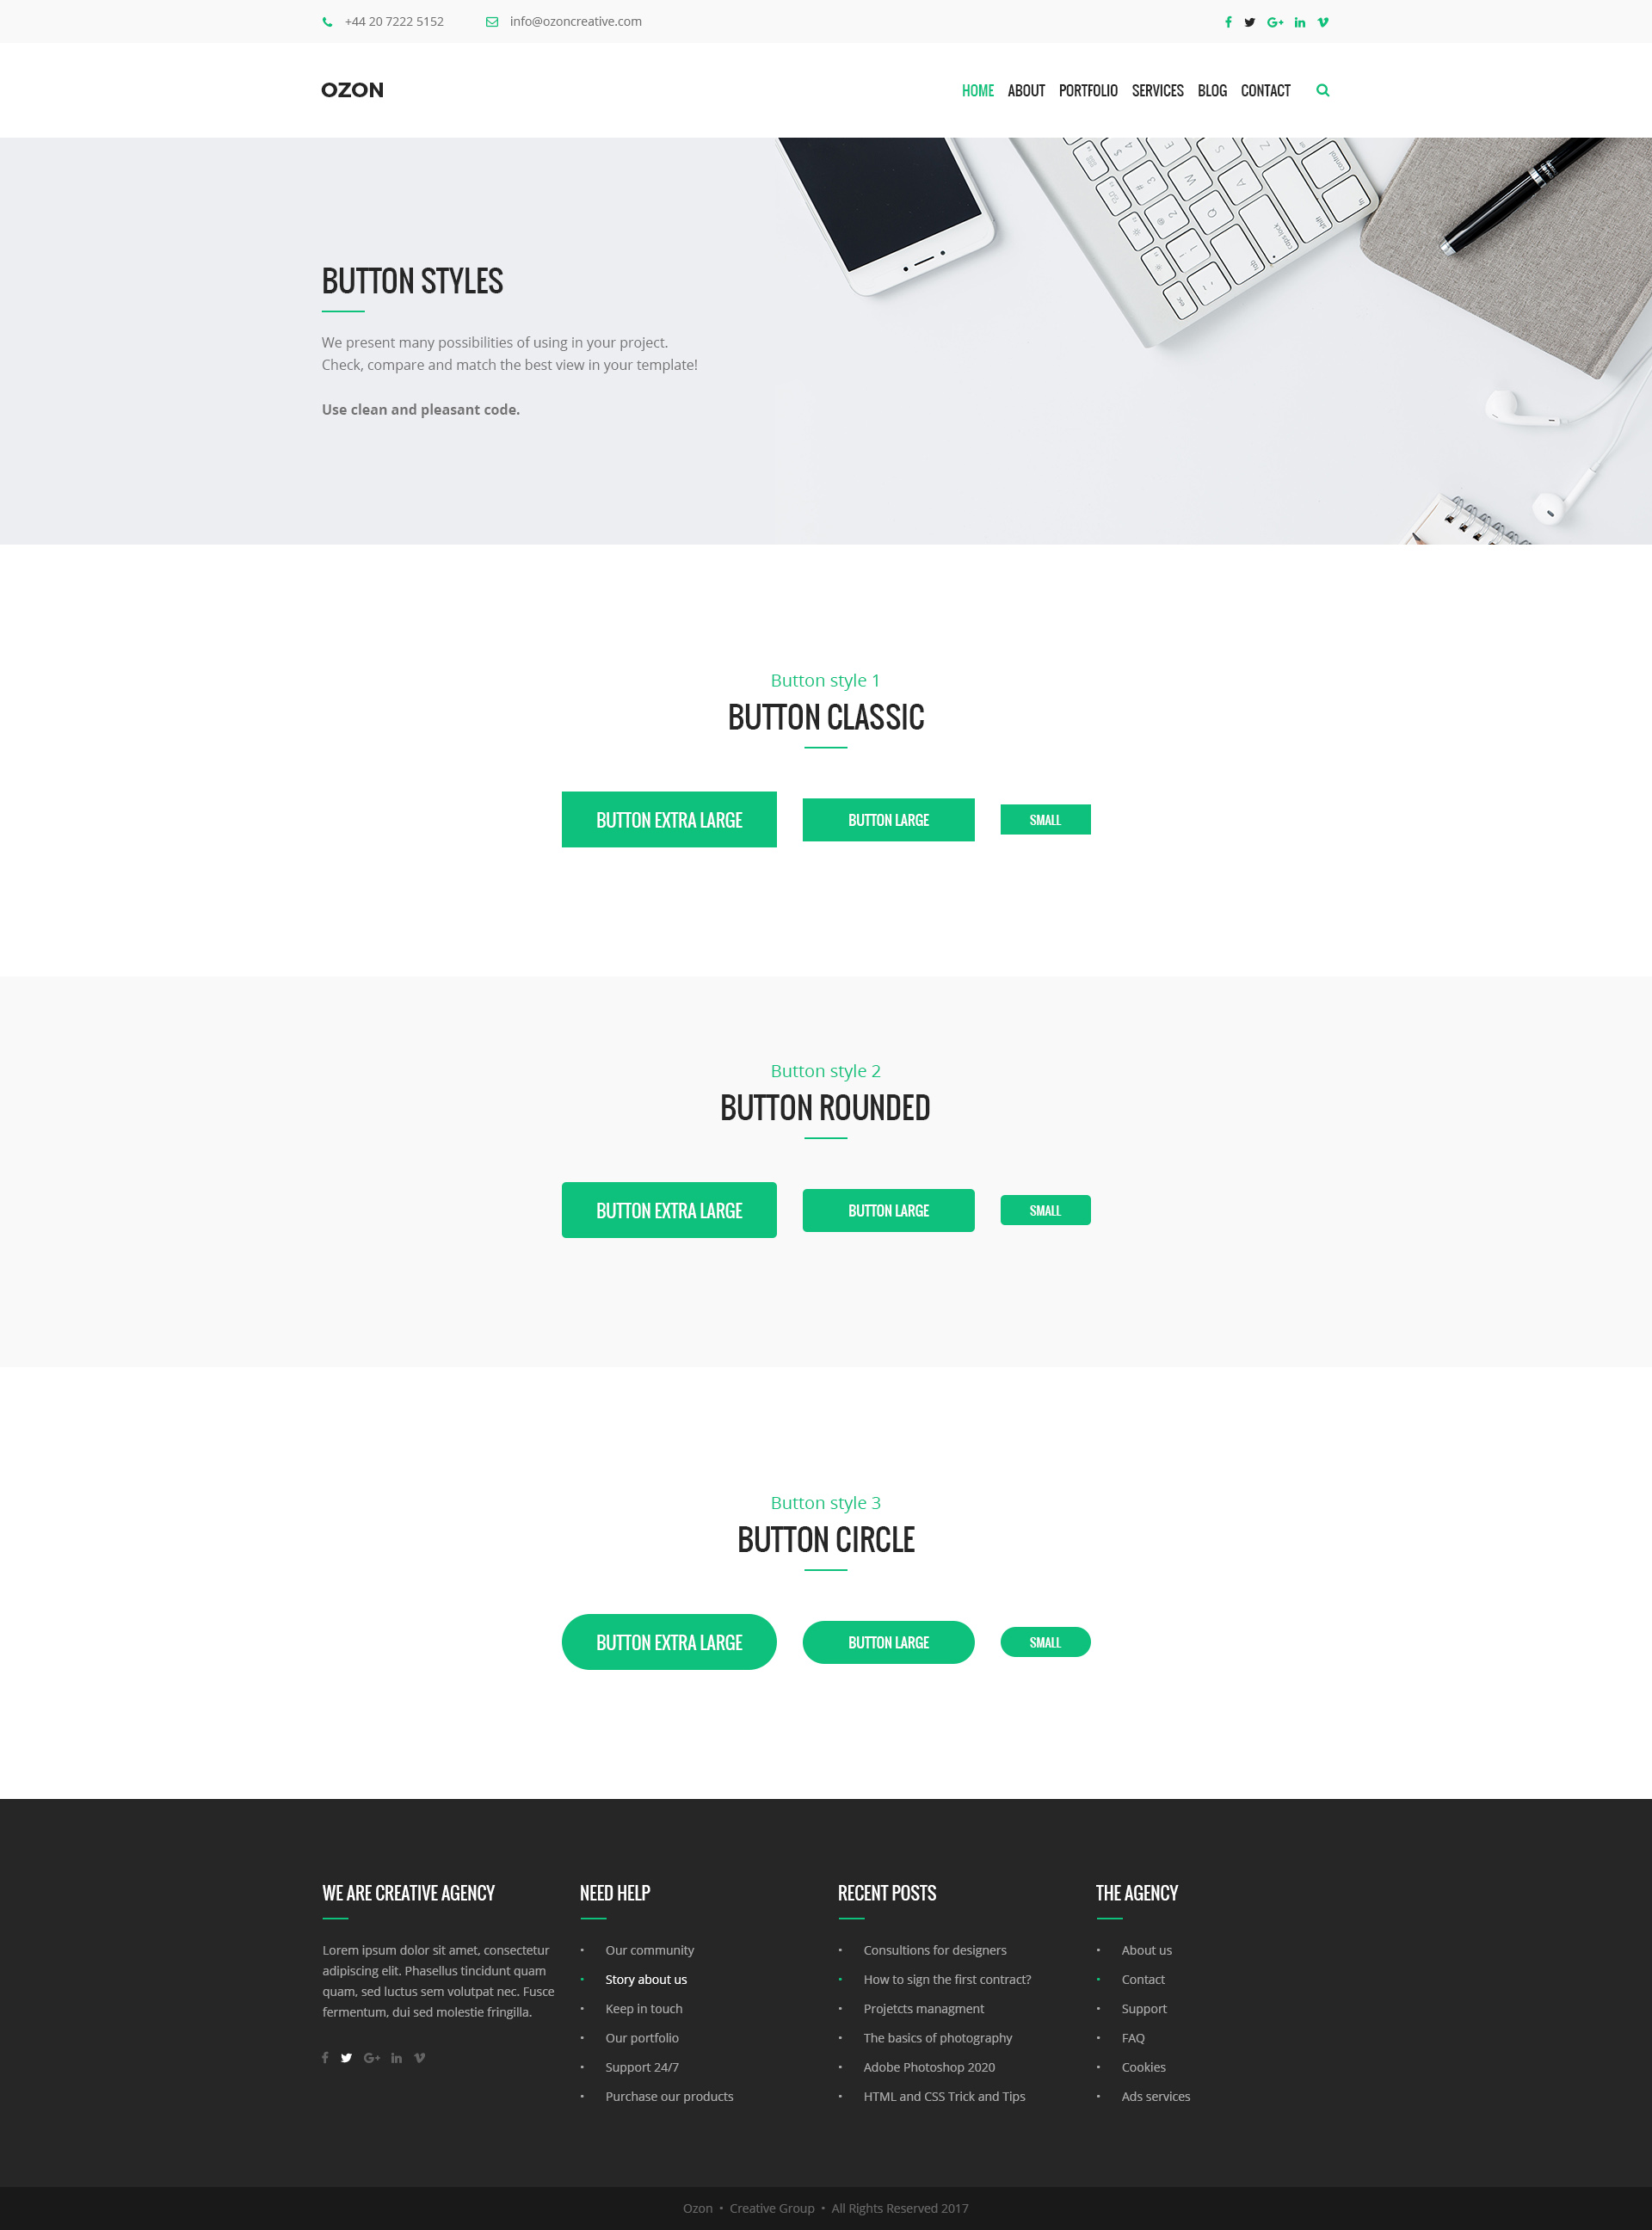 Ozon – Business and Creative Agency PSD Temaplate